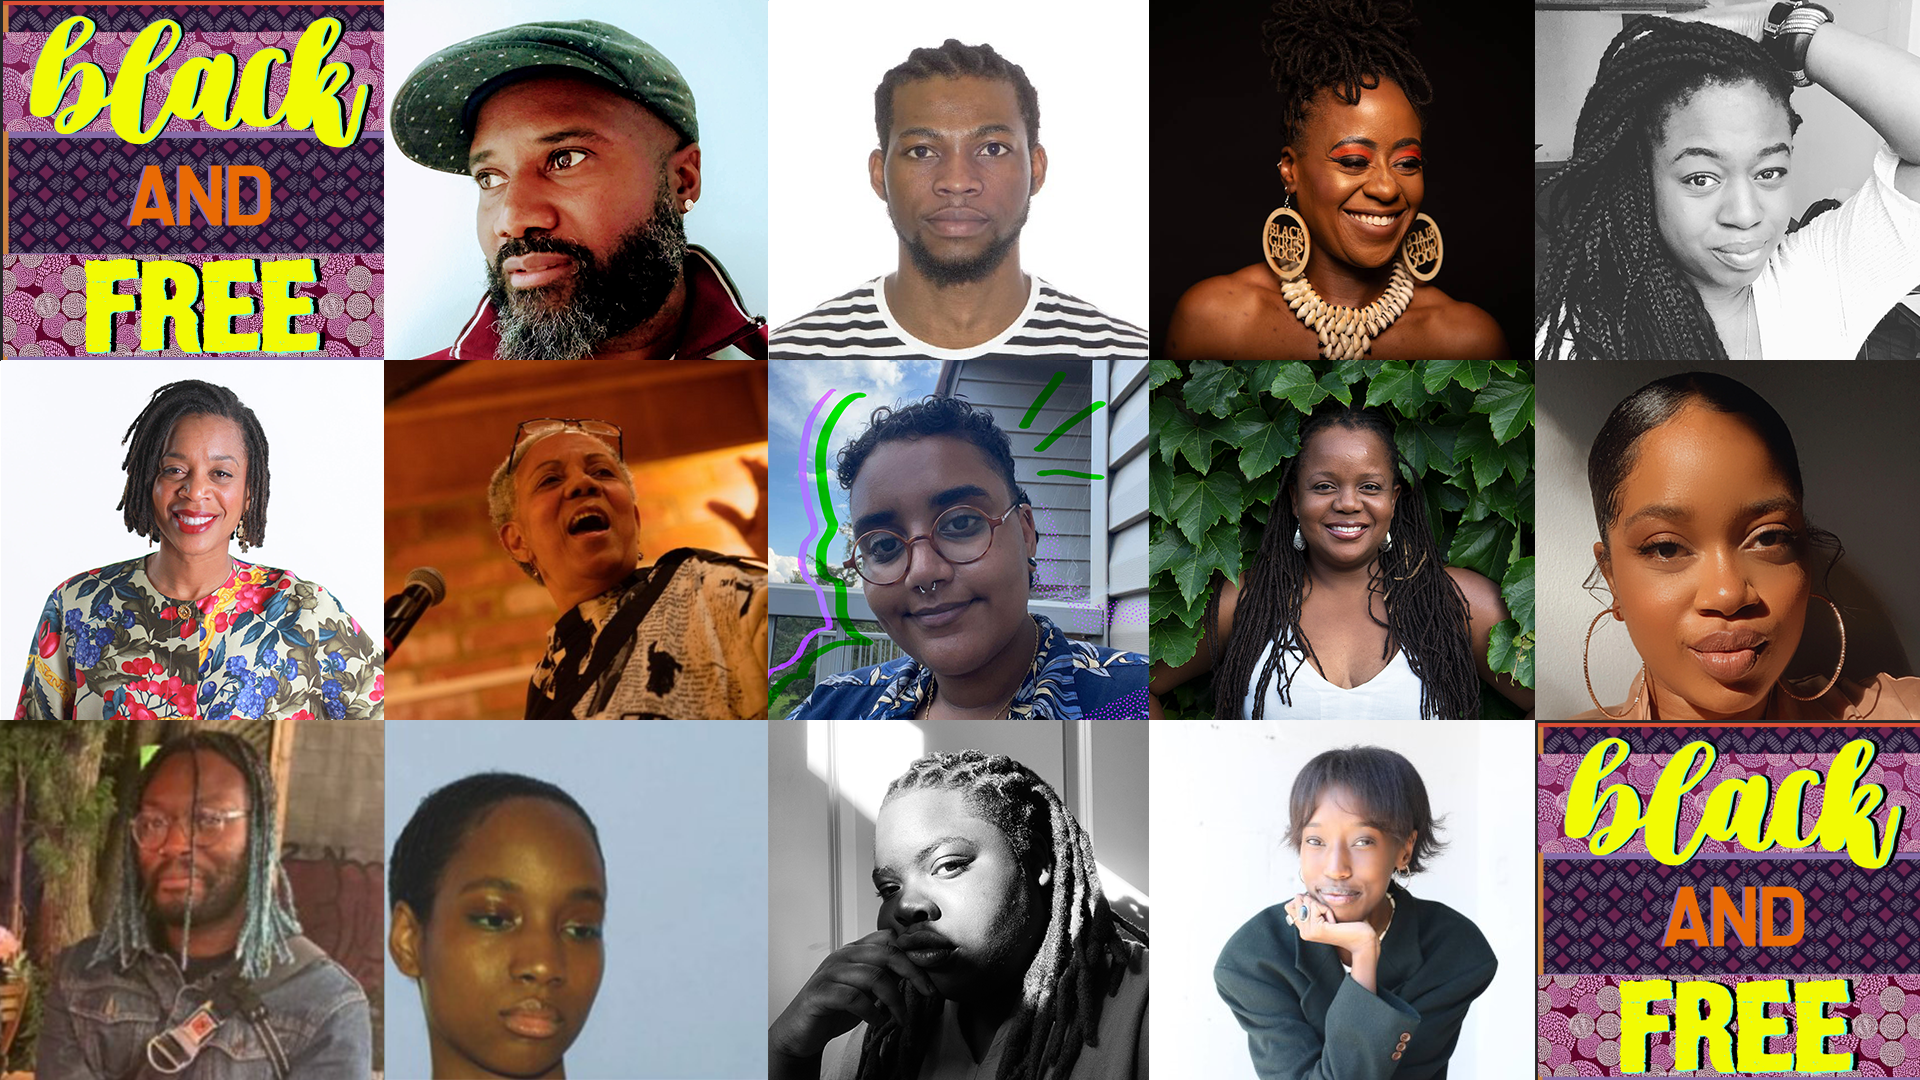 13 Black artists and Black and Free logo